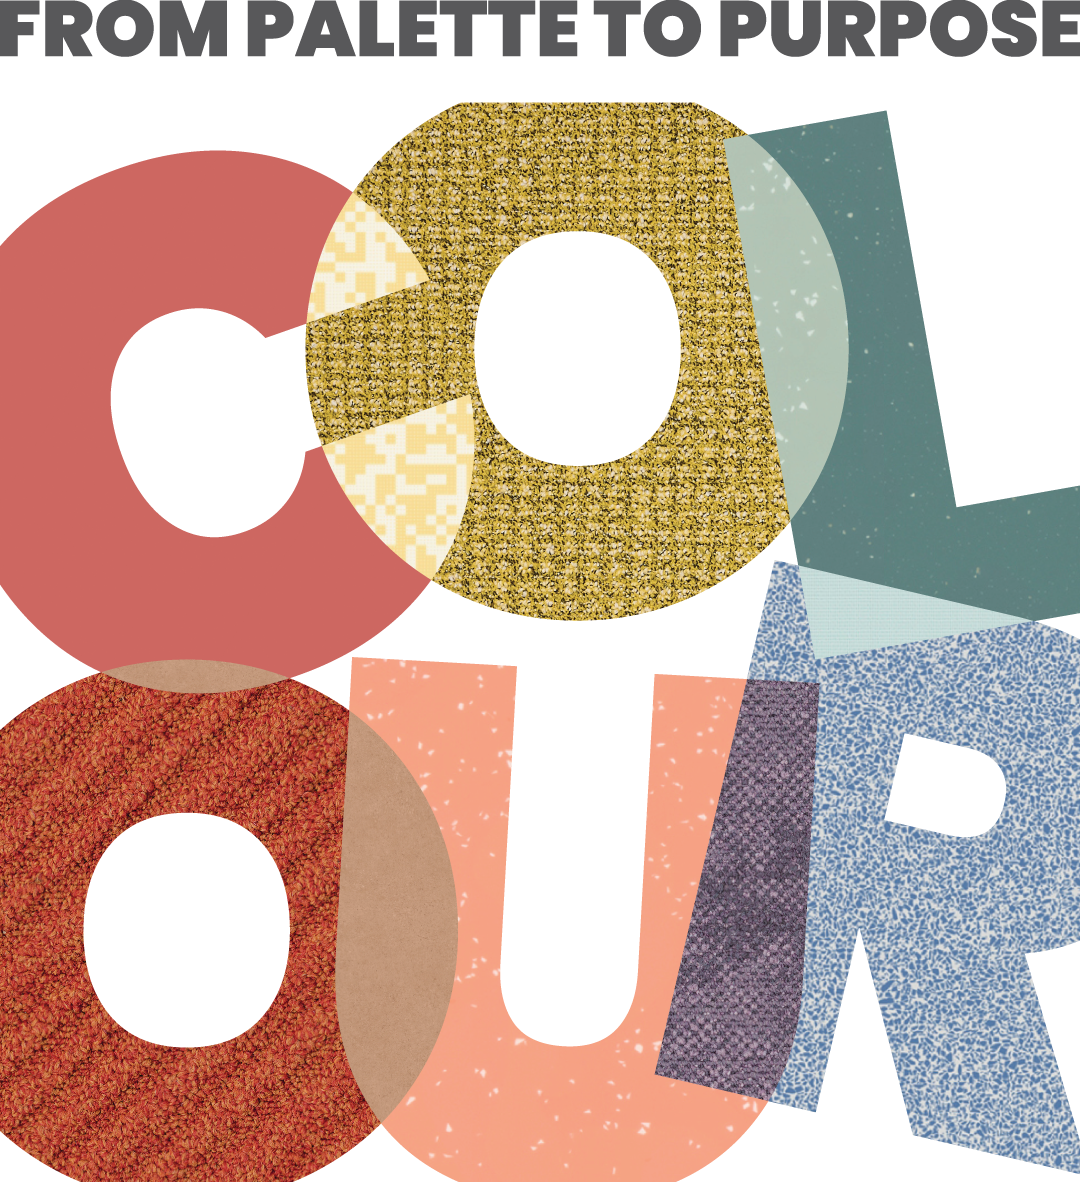 Colour_From_Palette_To_Purpose_Logotype_Variation (002)-03-1